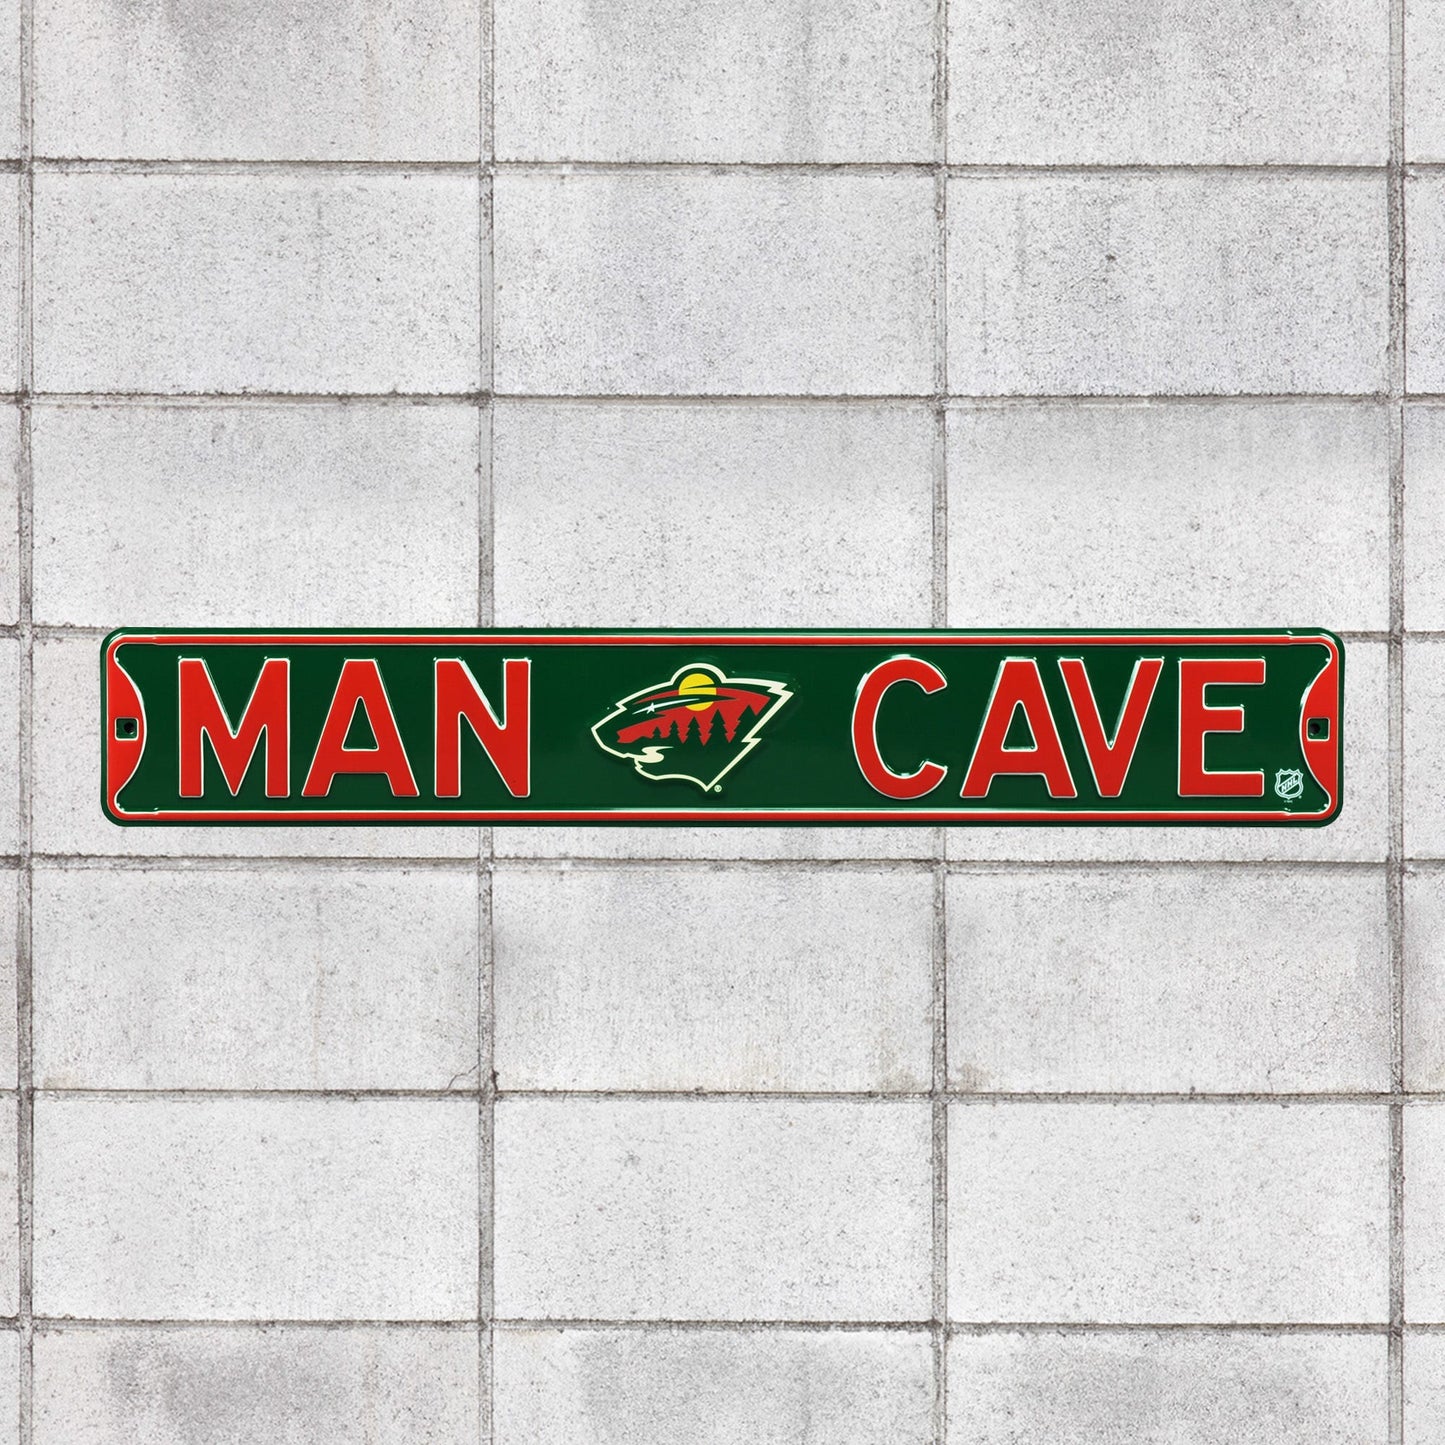 Minnesota Wild: Man Cave - Officially Licensed NHL Metal Street Sign